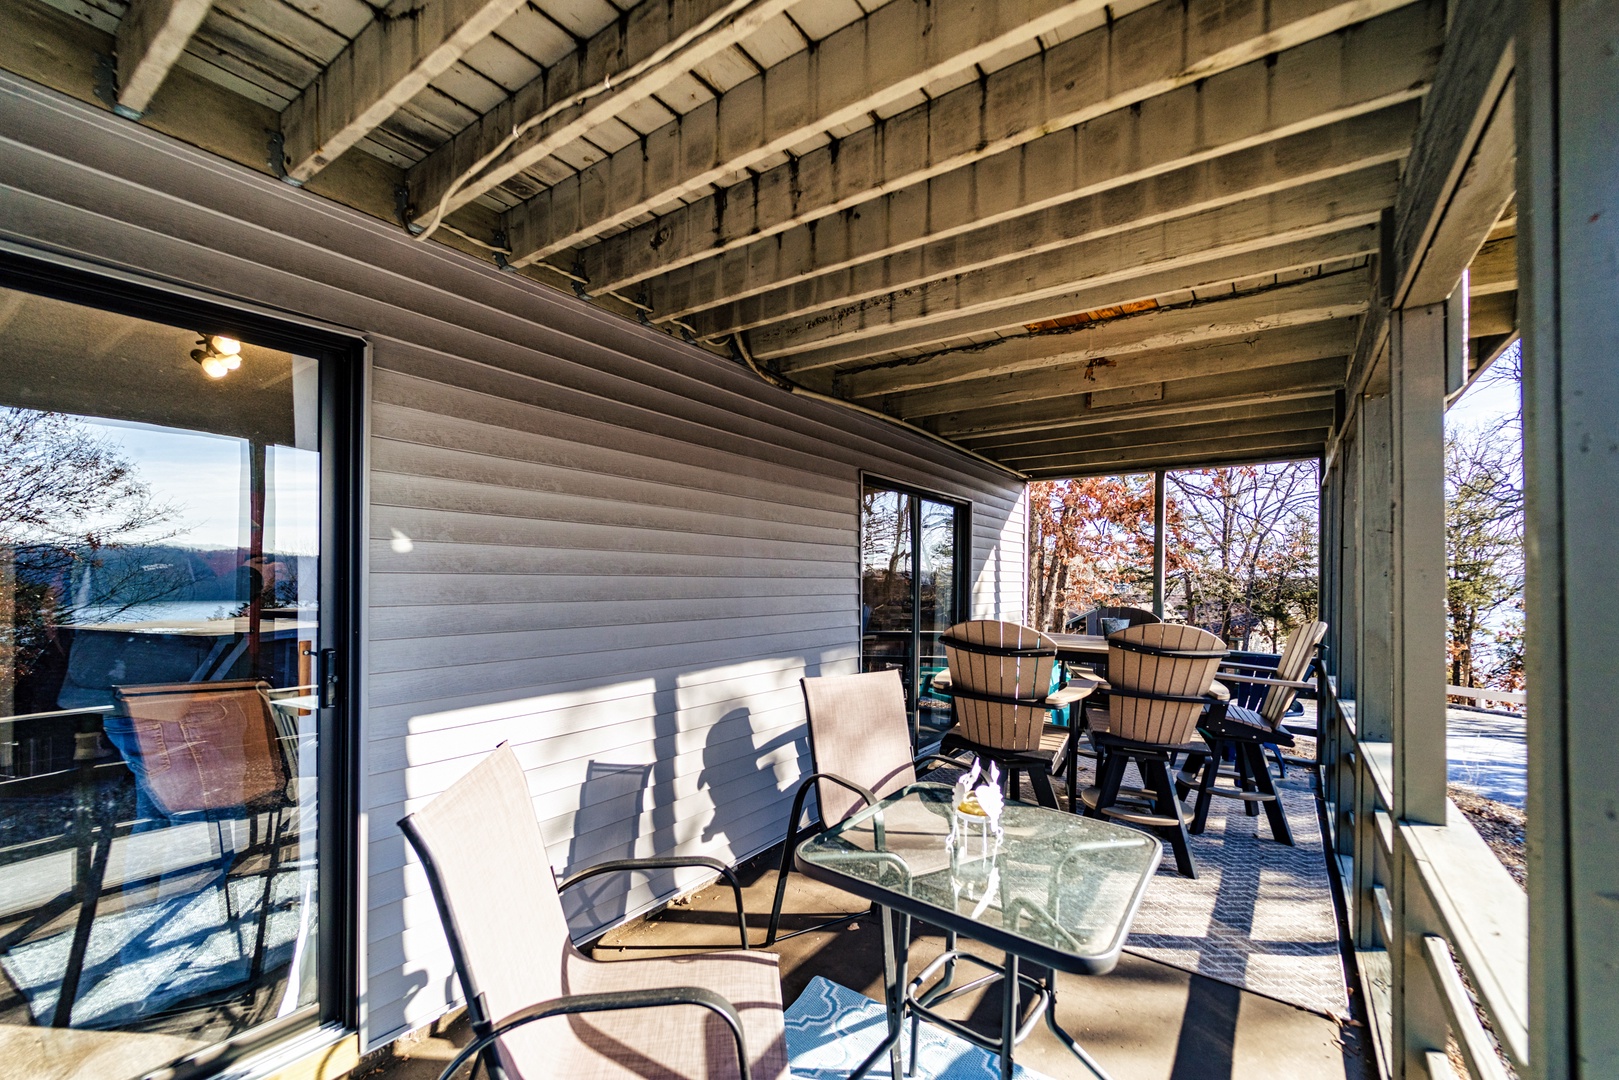 Bask in the fresh air and sunshine on the communal back deck